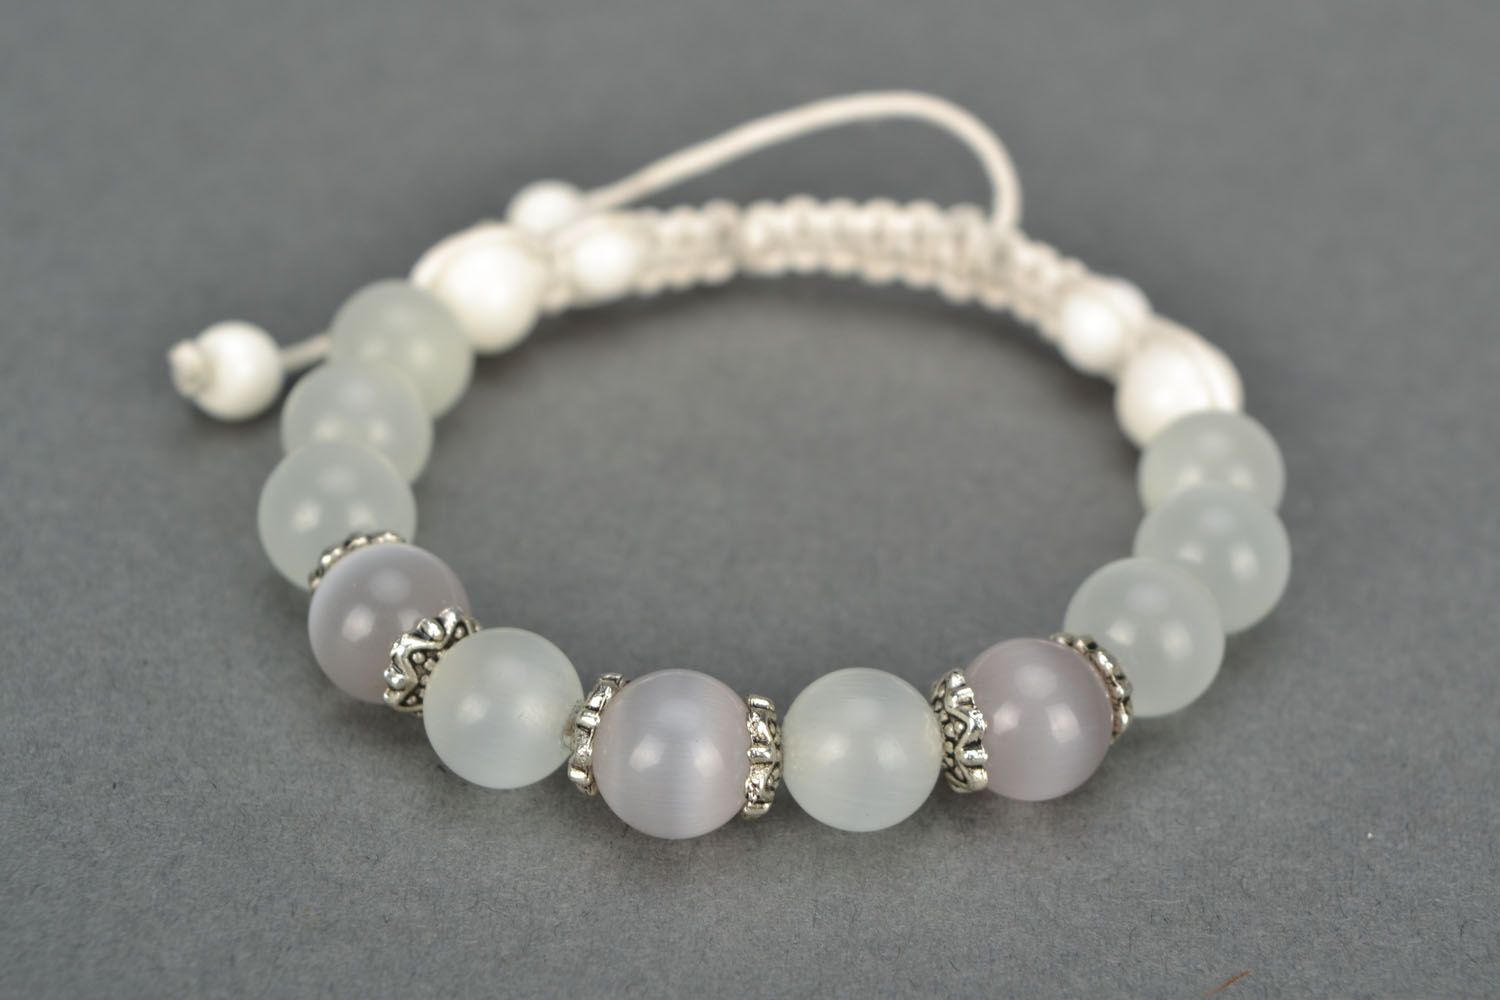 Bracelet with natural stones and cord photo 3